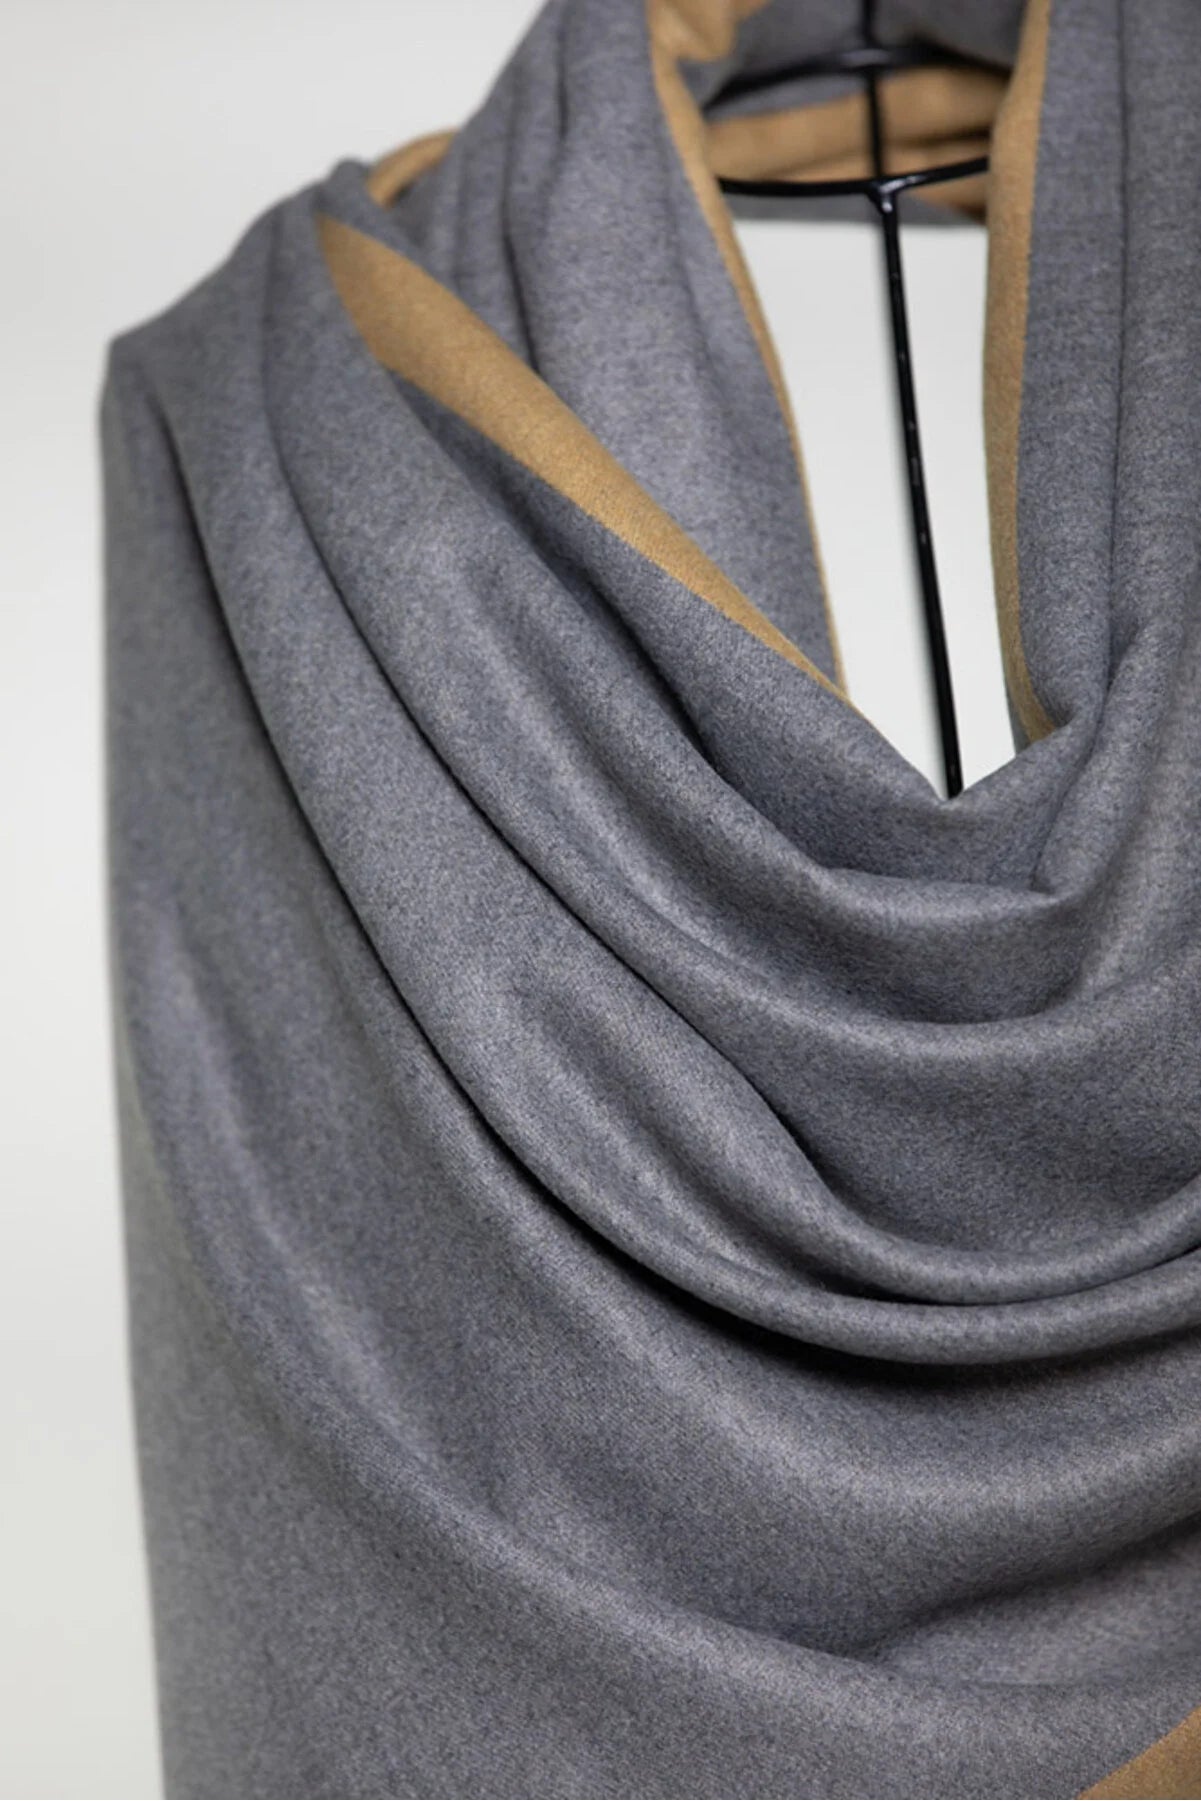 Simply Reversible Mo-shmere Rectangle Scarf - Cumin